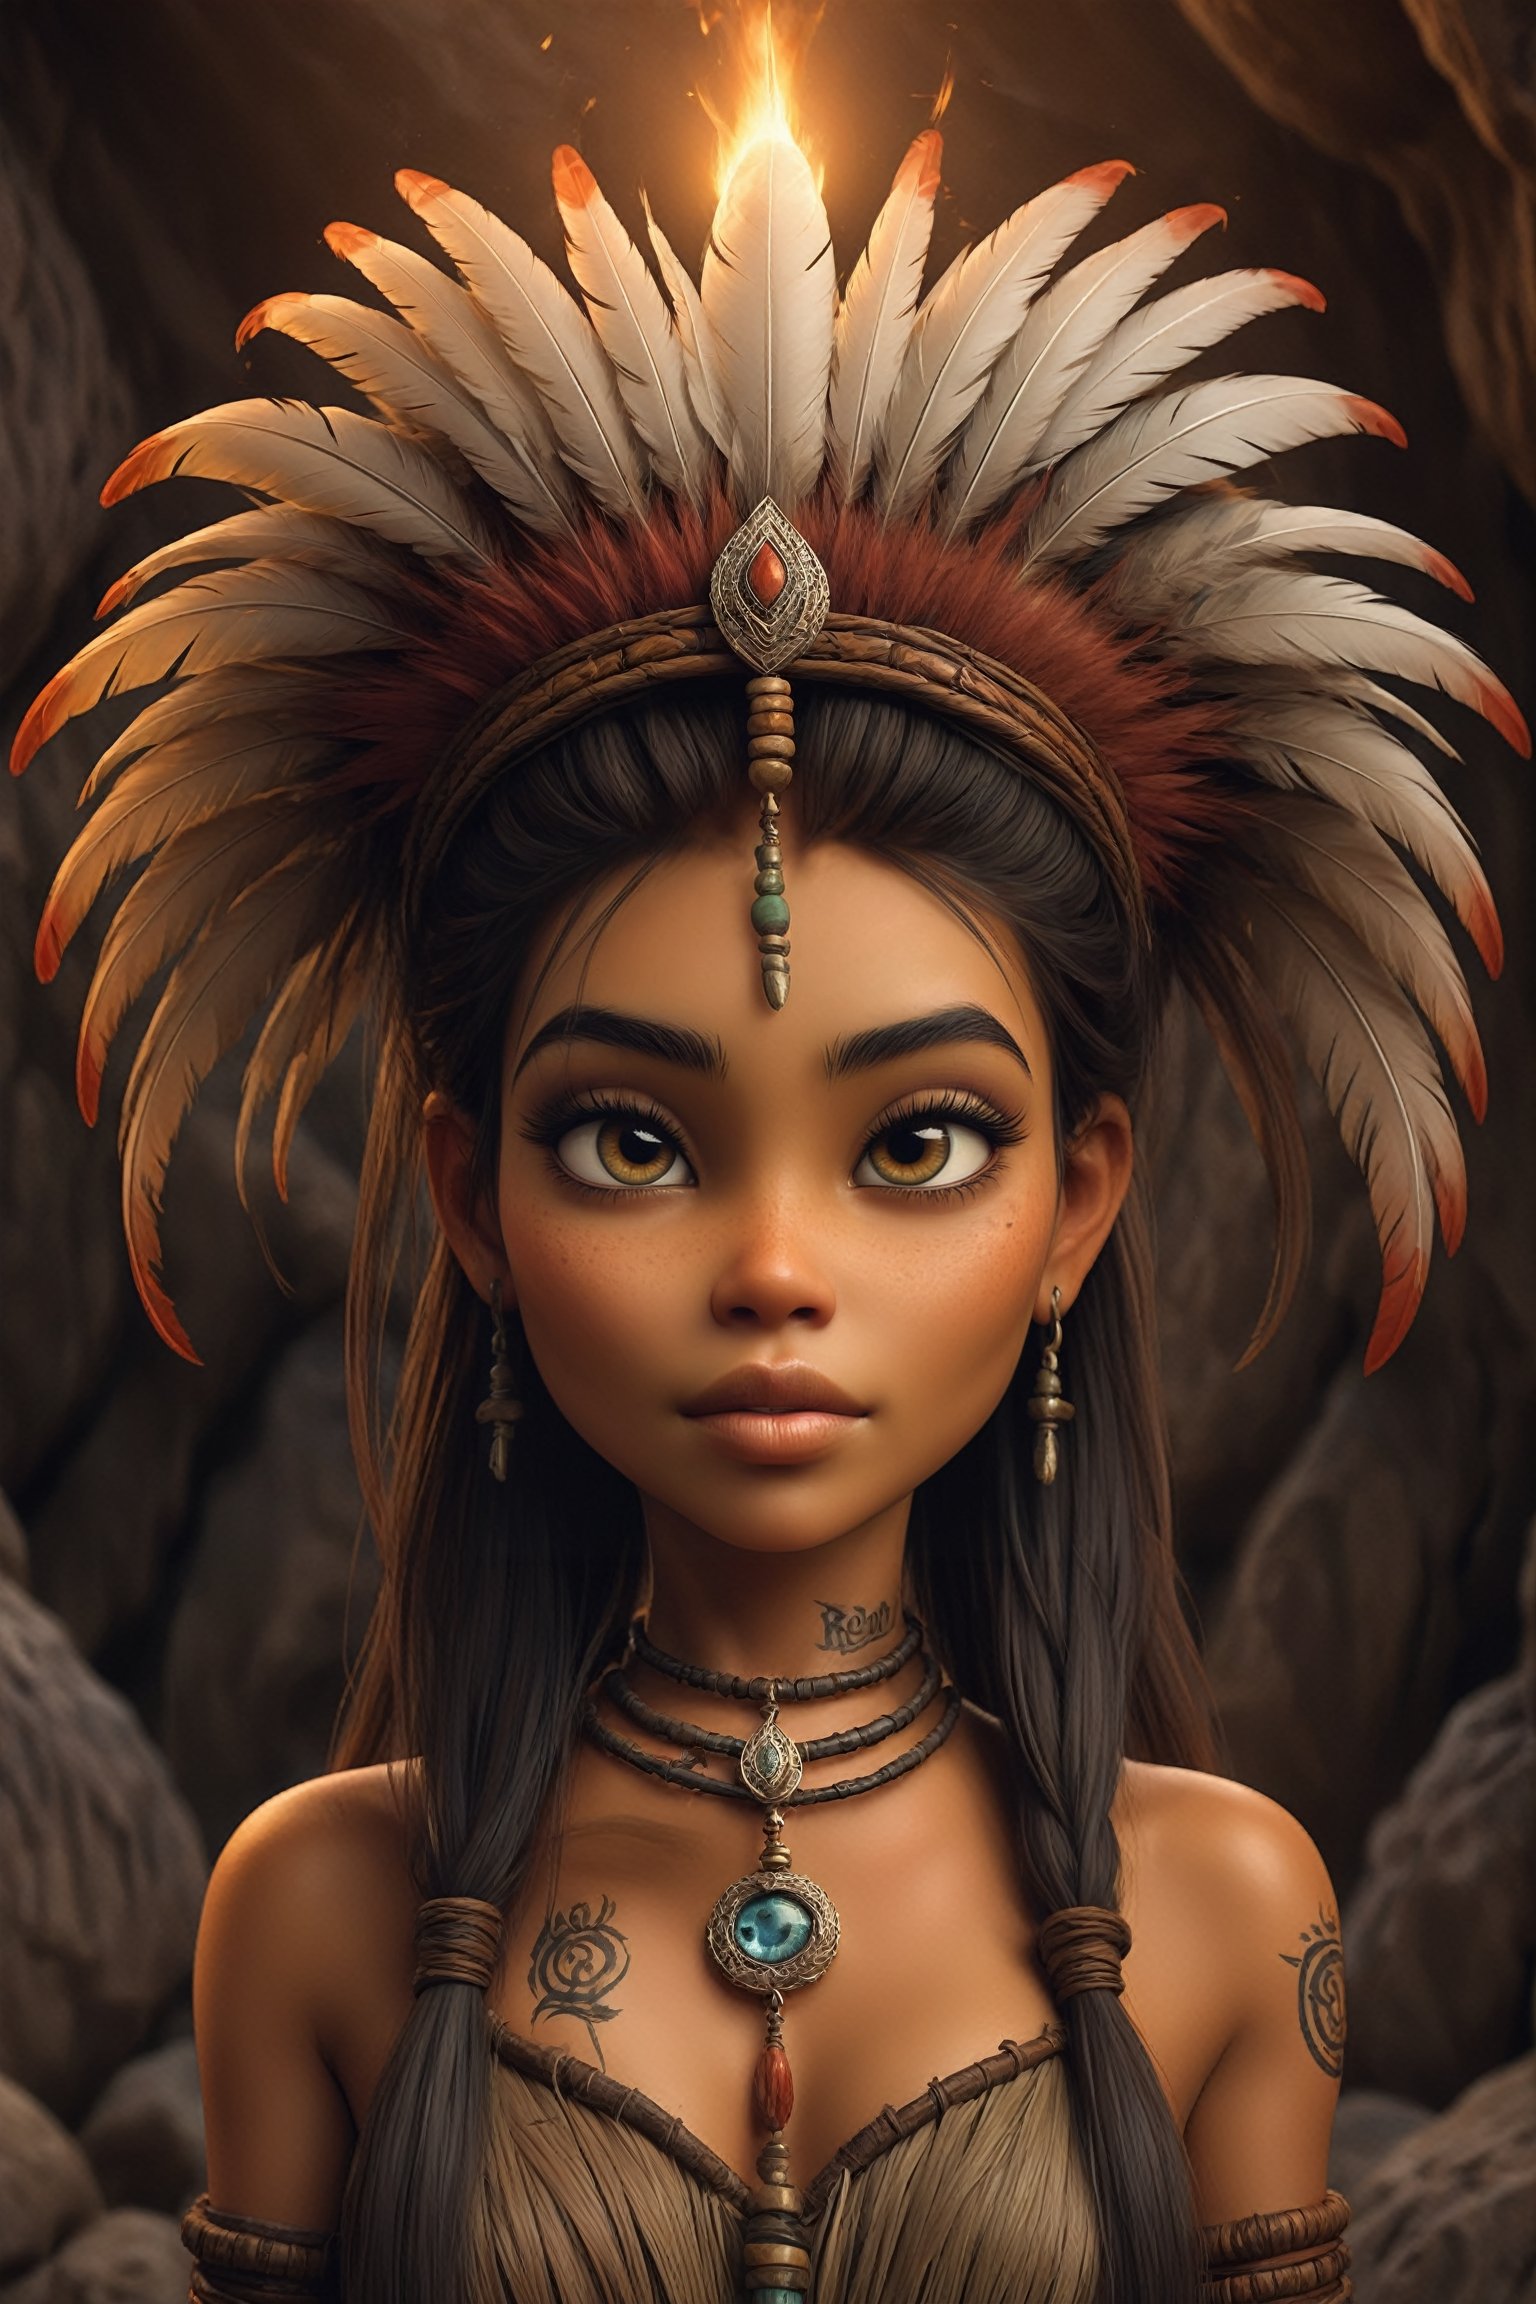 (in Don Bluth style:1.4), (masterpiece:1.2), (A female shaman, her body adorned with intricate tattoos that tell the story of her lineage, wearing a headdress of woven feathers and bones that echo the whispers of the ancestors, wearing unique Avant-garde masterpiece attire and headdress:1.1), (depicted in an earthy tribal style with warm natural lighting, set against the backdrop of a ceremonial cave filled with flickering firelight and ancient symbols:1.1), (hyperdetailed:1.1), (intricate details:1.0), (Refined details:1.1), (best quality:1.1), (very stylish detailed modern haircut, mesmerizing detailed radiant face, mesmerizing detailed beautiful eyes:1.2)